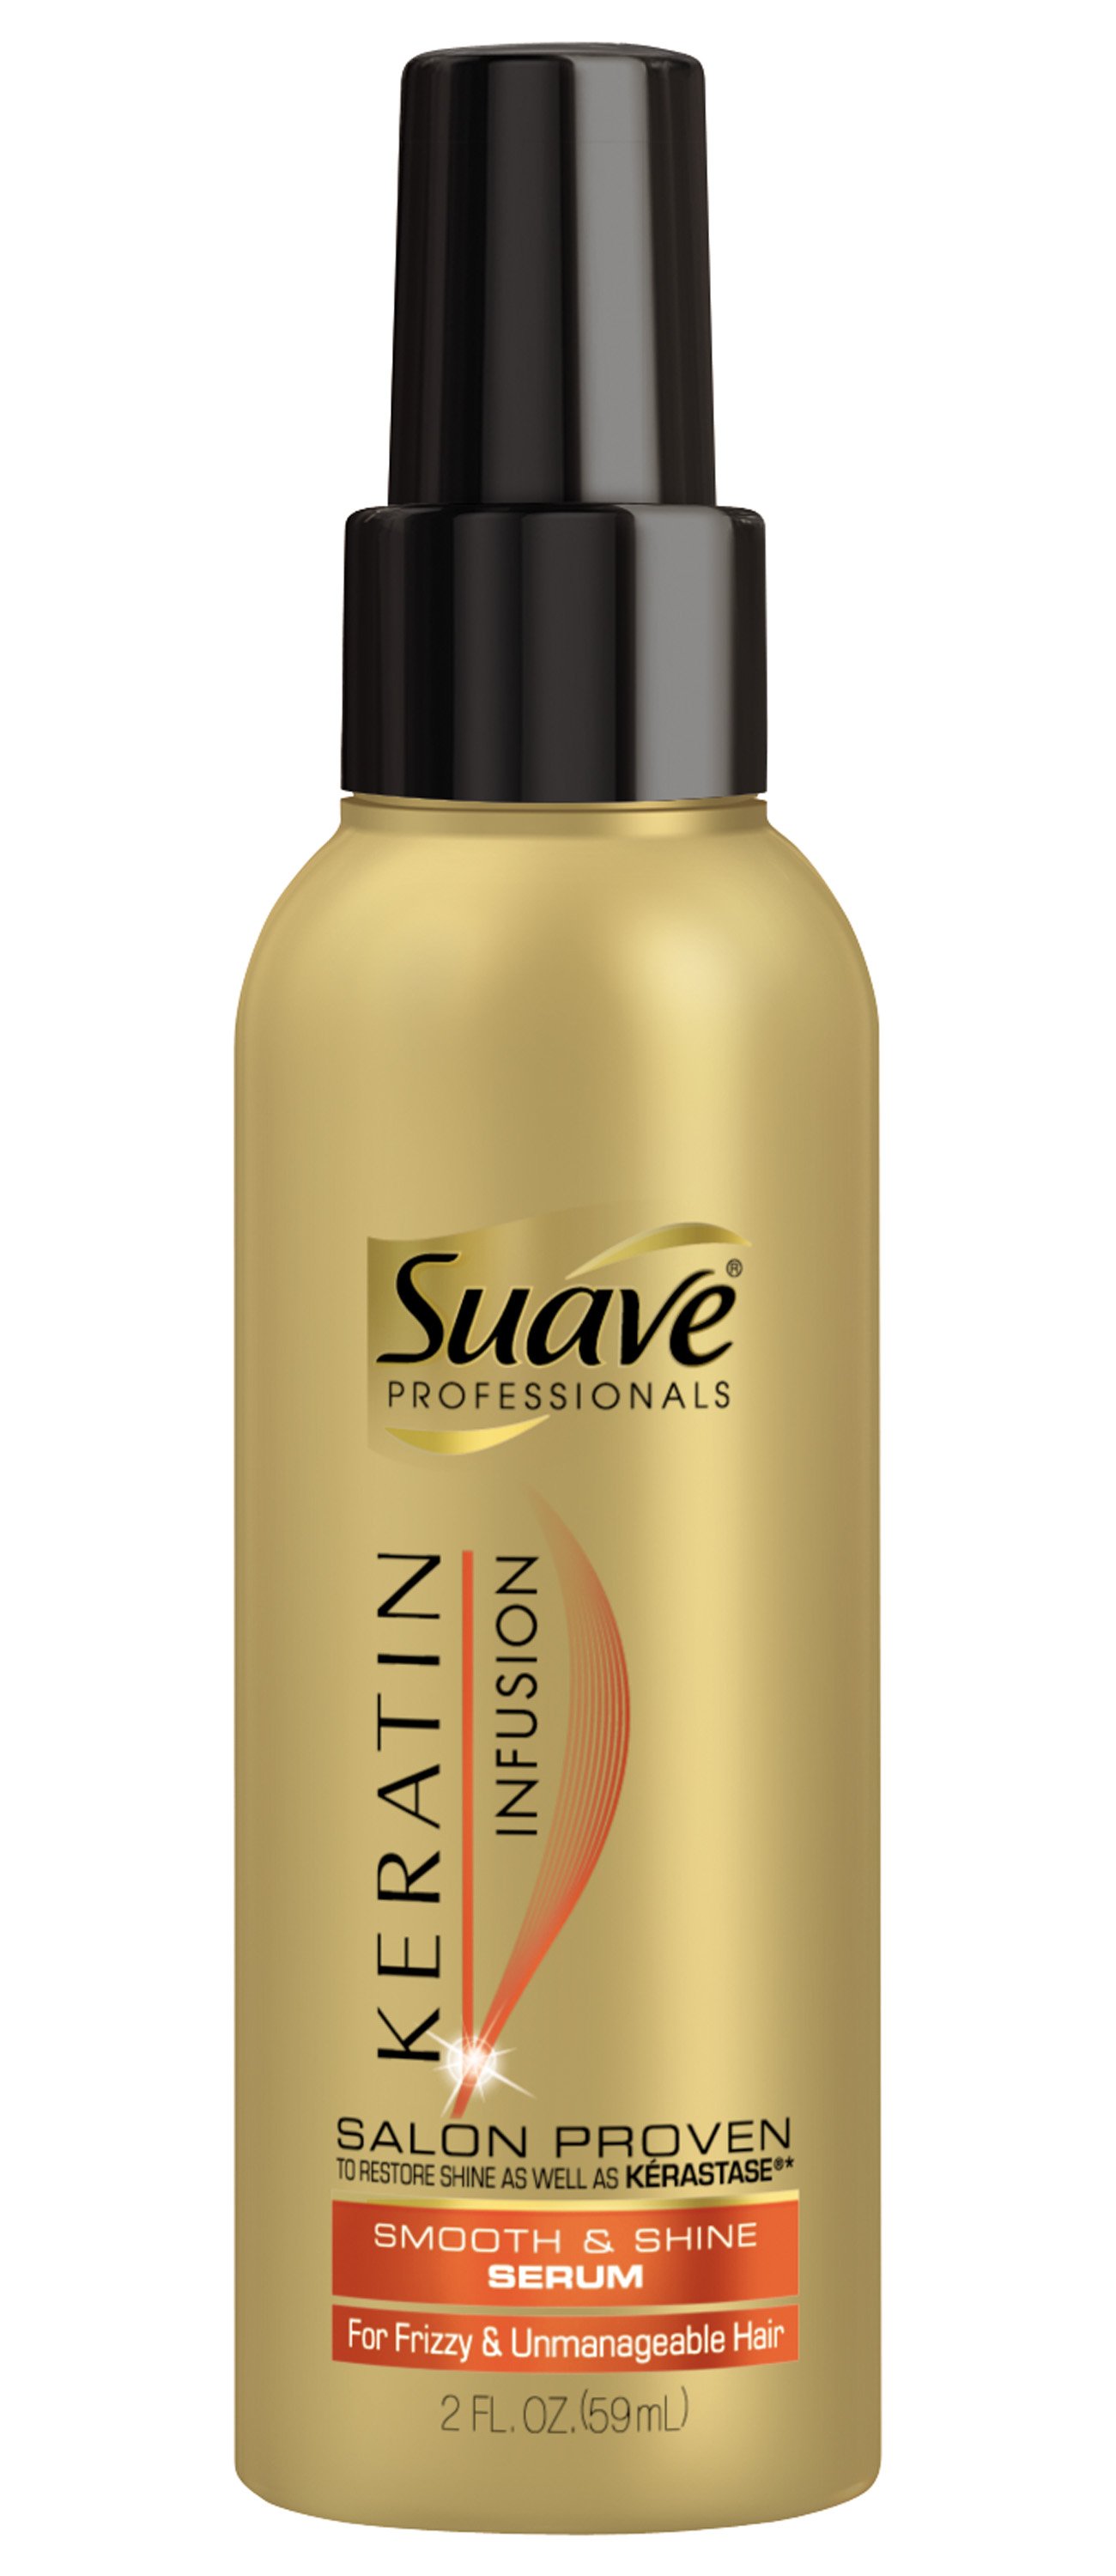 Suave Professionals Keratin Infusion Smooth and Shine Serum - Shop Suave  Professionals Keratin Infusion Smooth and Shine Serum - Shop Suave  Professionals Keratin Infusion Smooth and Shine Serum - Shop Suave  Professionals